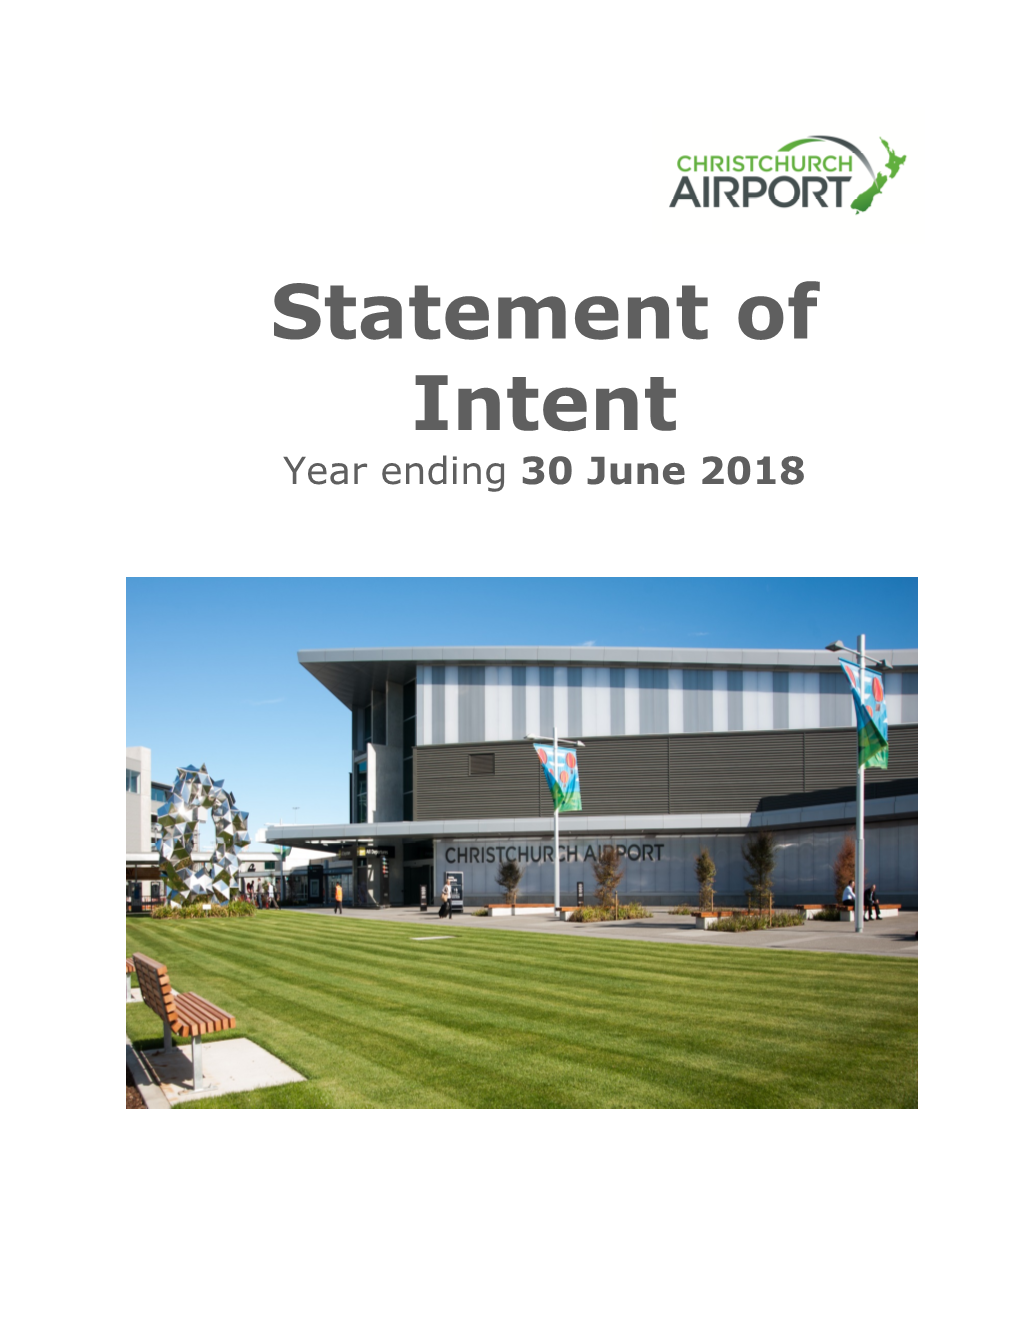 Statement of Intent Year Ending 30 June 2018